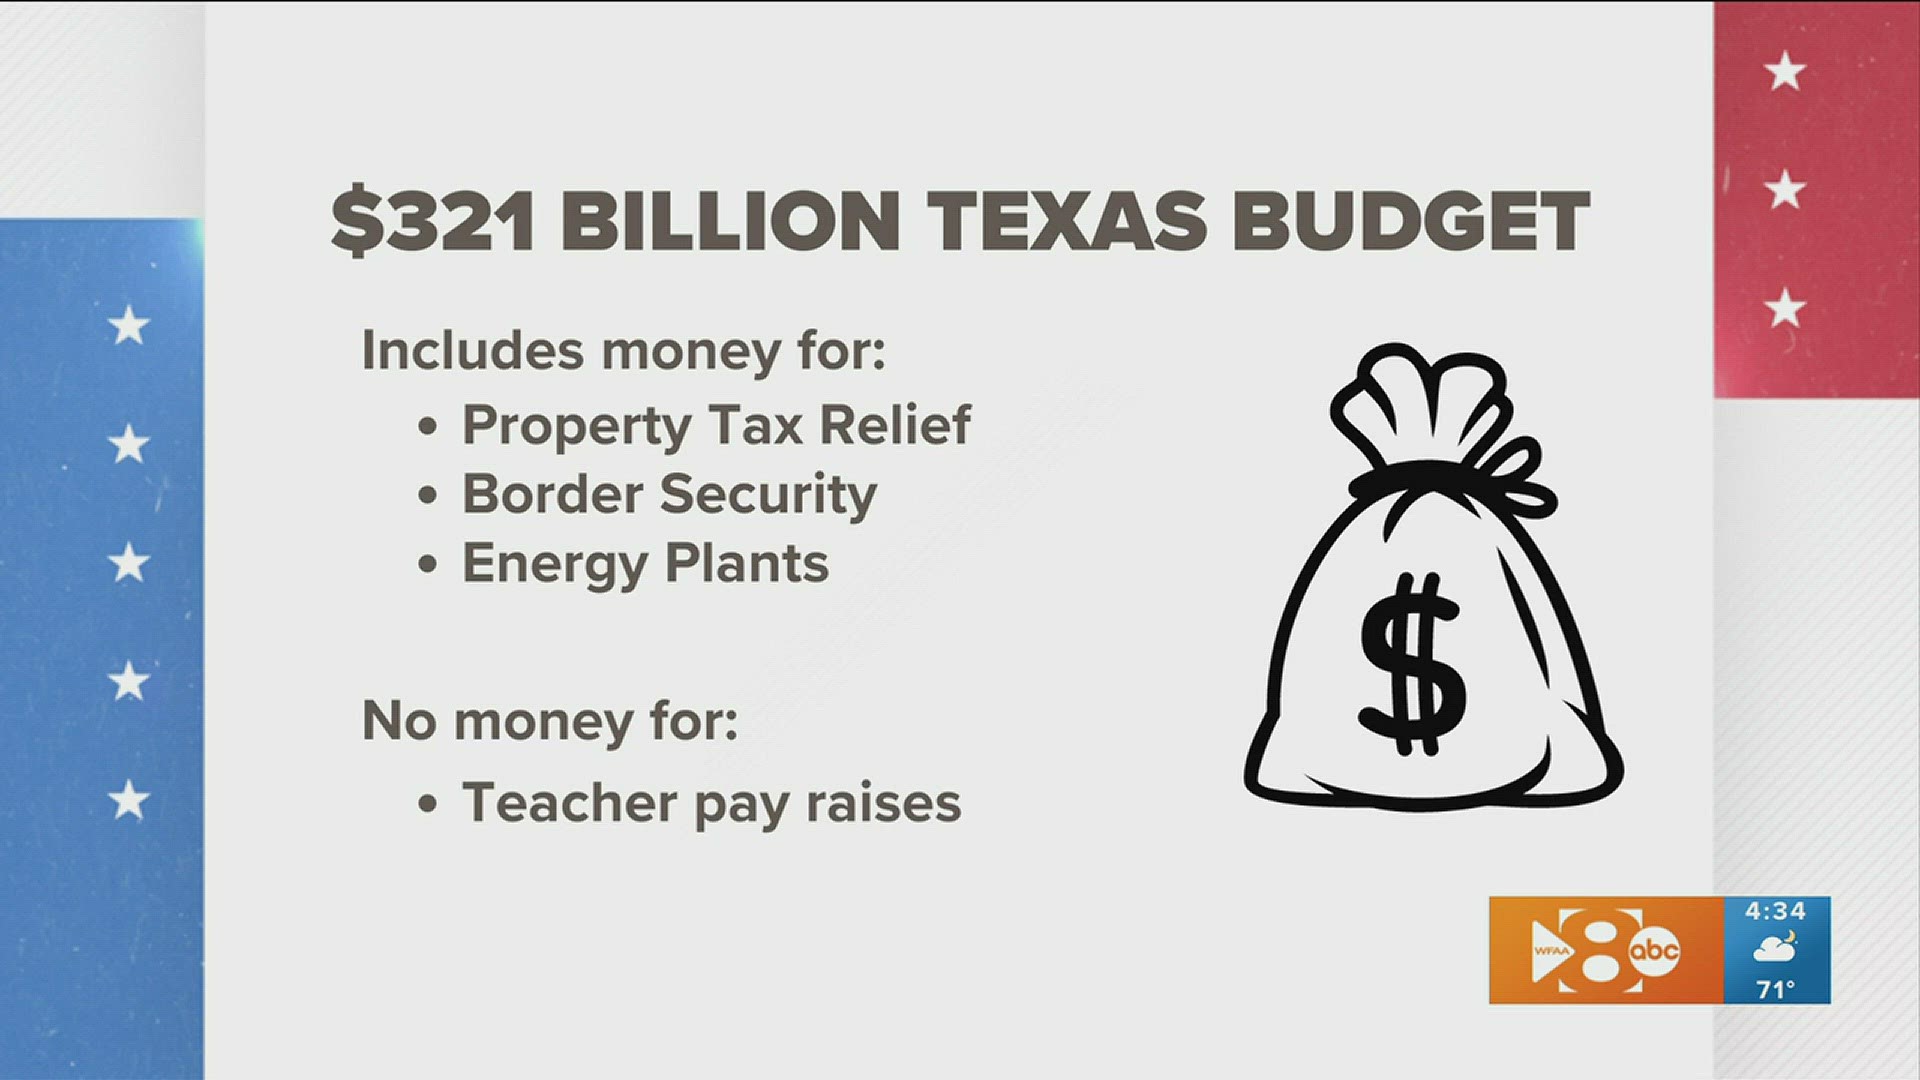 The updated budget includes funding for property tax relief, border security and energy plants -- but notably doesn't include funds for teacher pay raises.